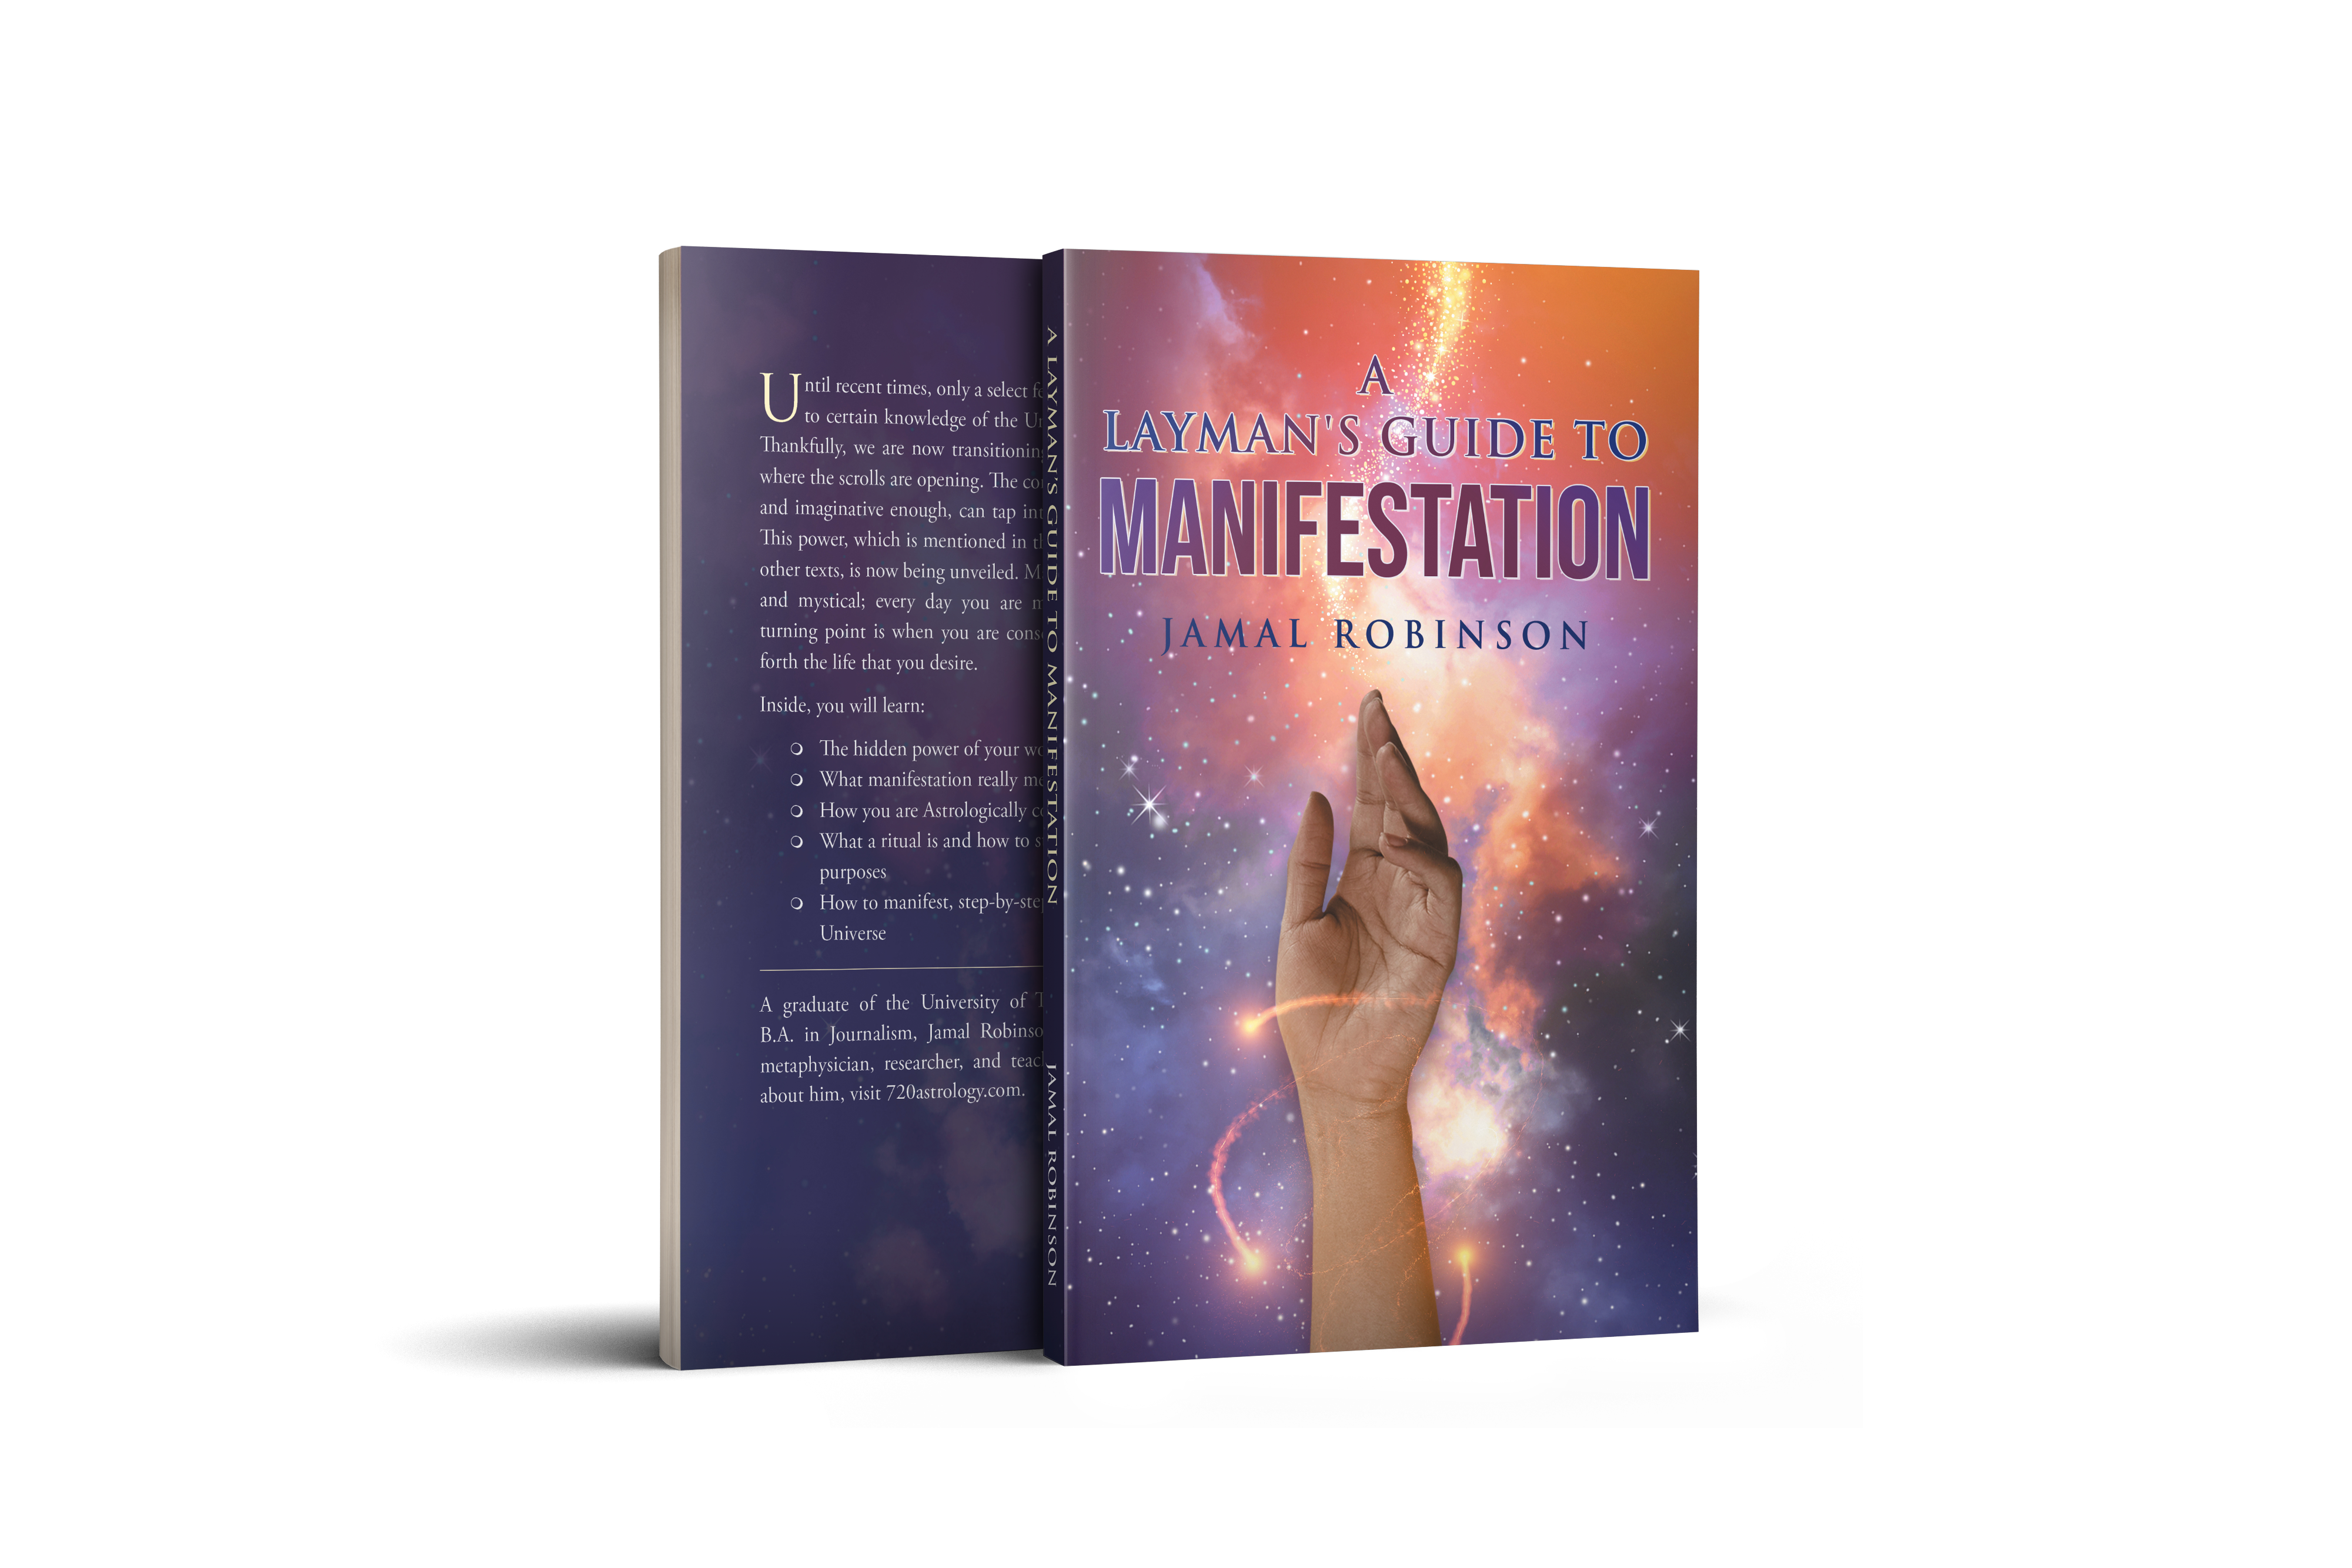 A Layman’s Guide to Manifestation new book by Jamal Robinson